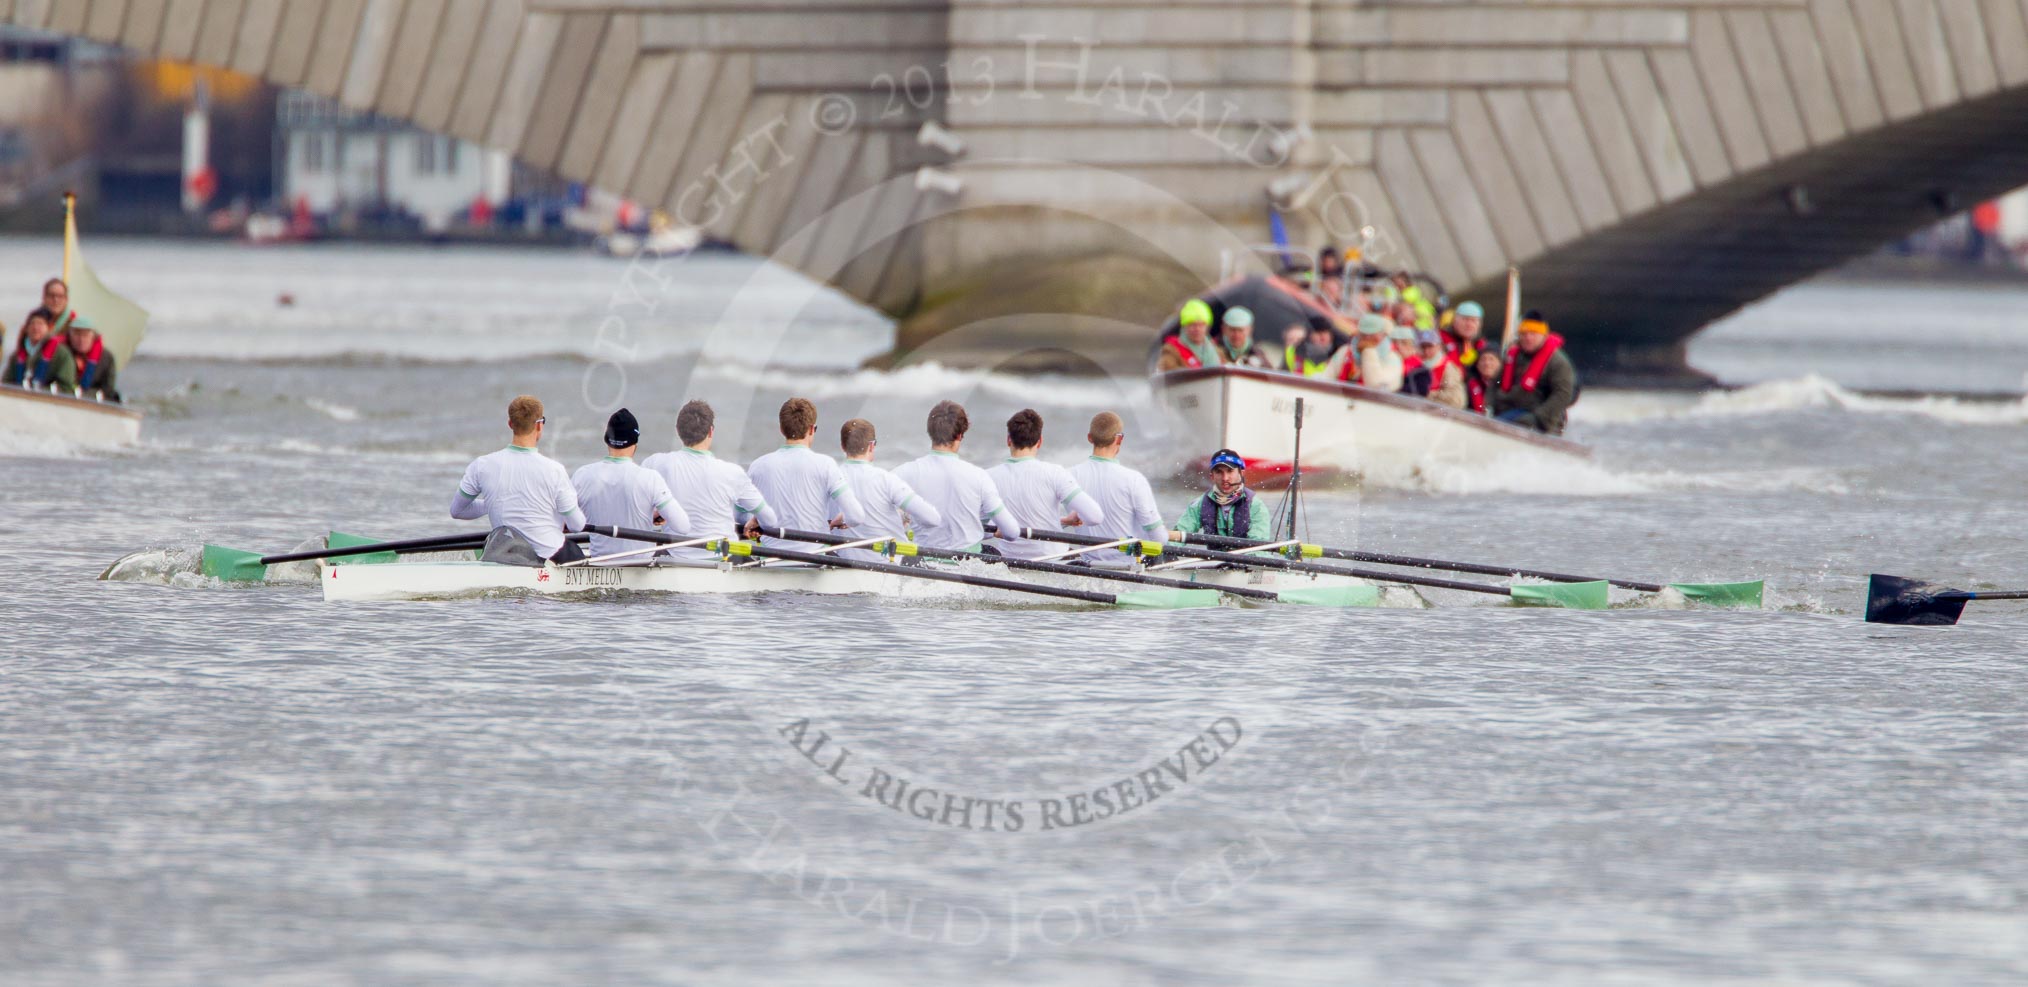 The Boat Race 2013.
Putney,
London SW15,

United Kingdom,
on 31 March 2013 at 16:31, image #267